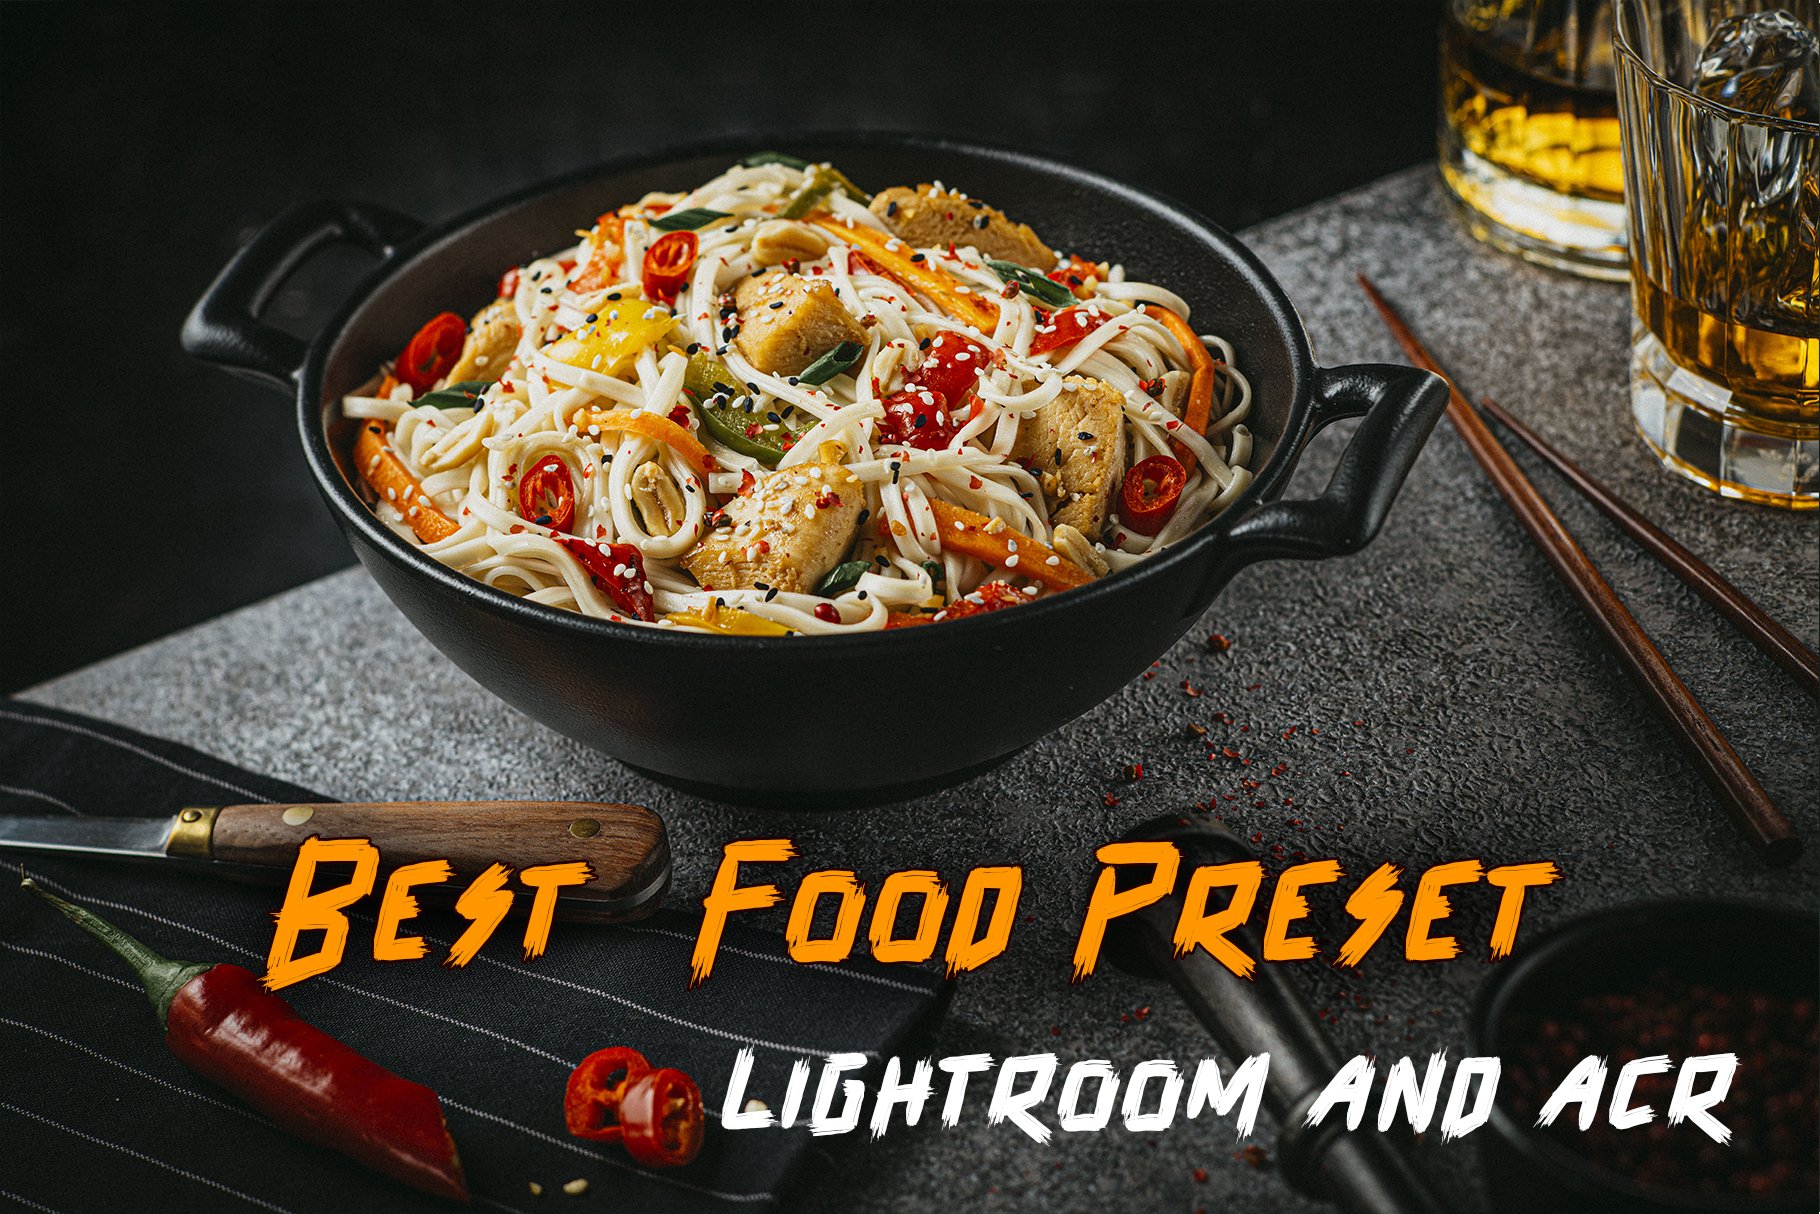 Loweday Food Presets - LR and ACRcover image.